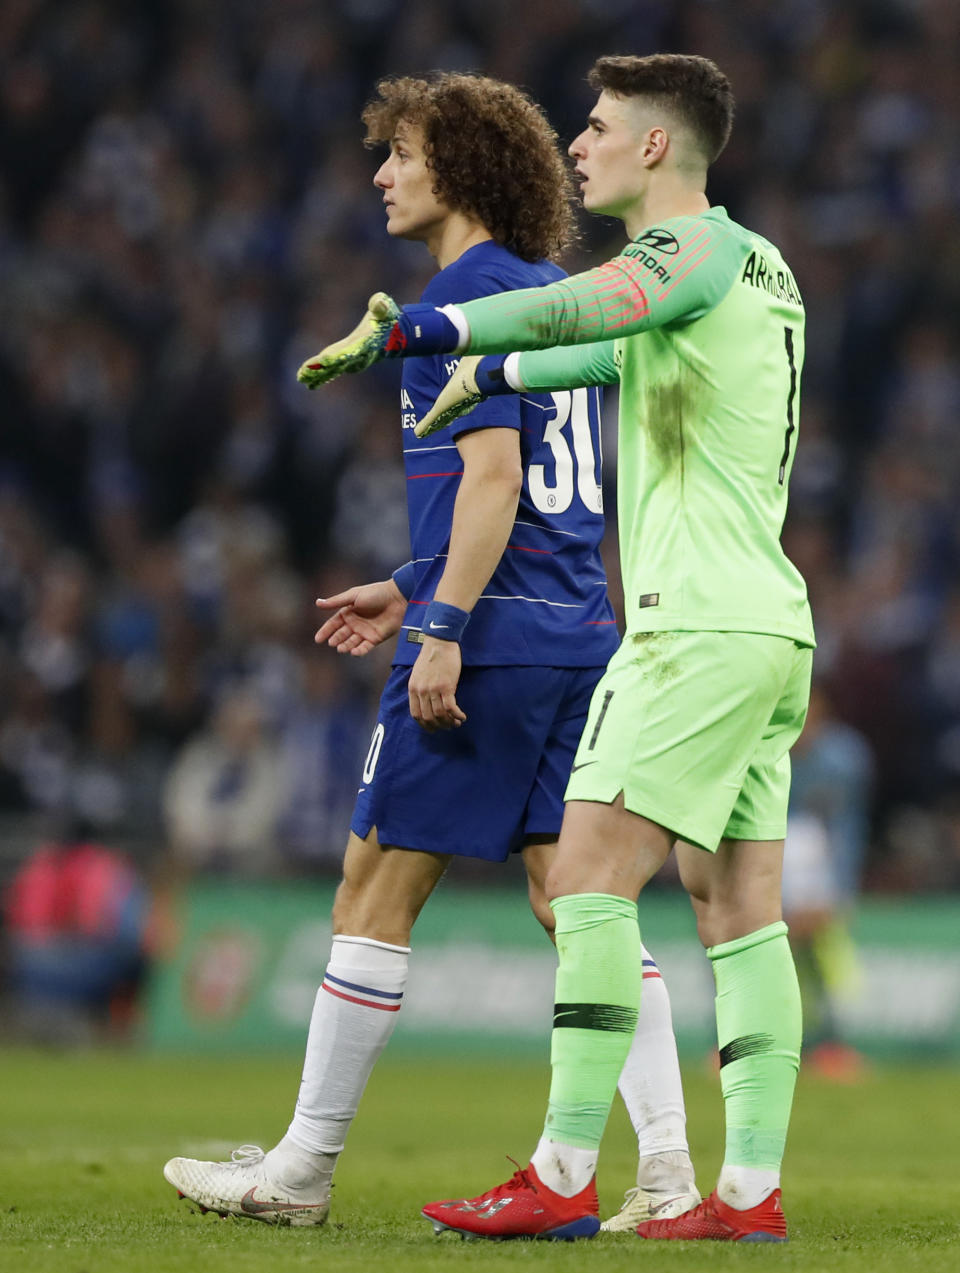 Chelsea's David Luiz, left, walks past Chelsea goalkeeper Kepa Arrizabalaga, right, during the English League Cup final soccer match between Chelsea and Manchester City at Wembley stadium in London, England, Sunday, Feb. 24, 2019. (AP Photo/Alastair Grant)